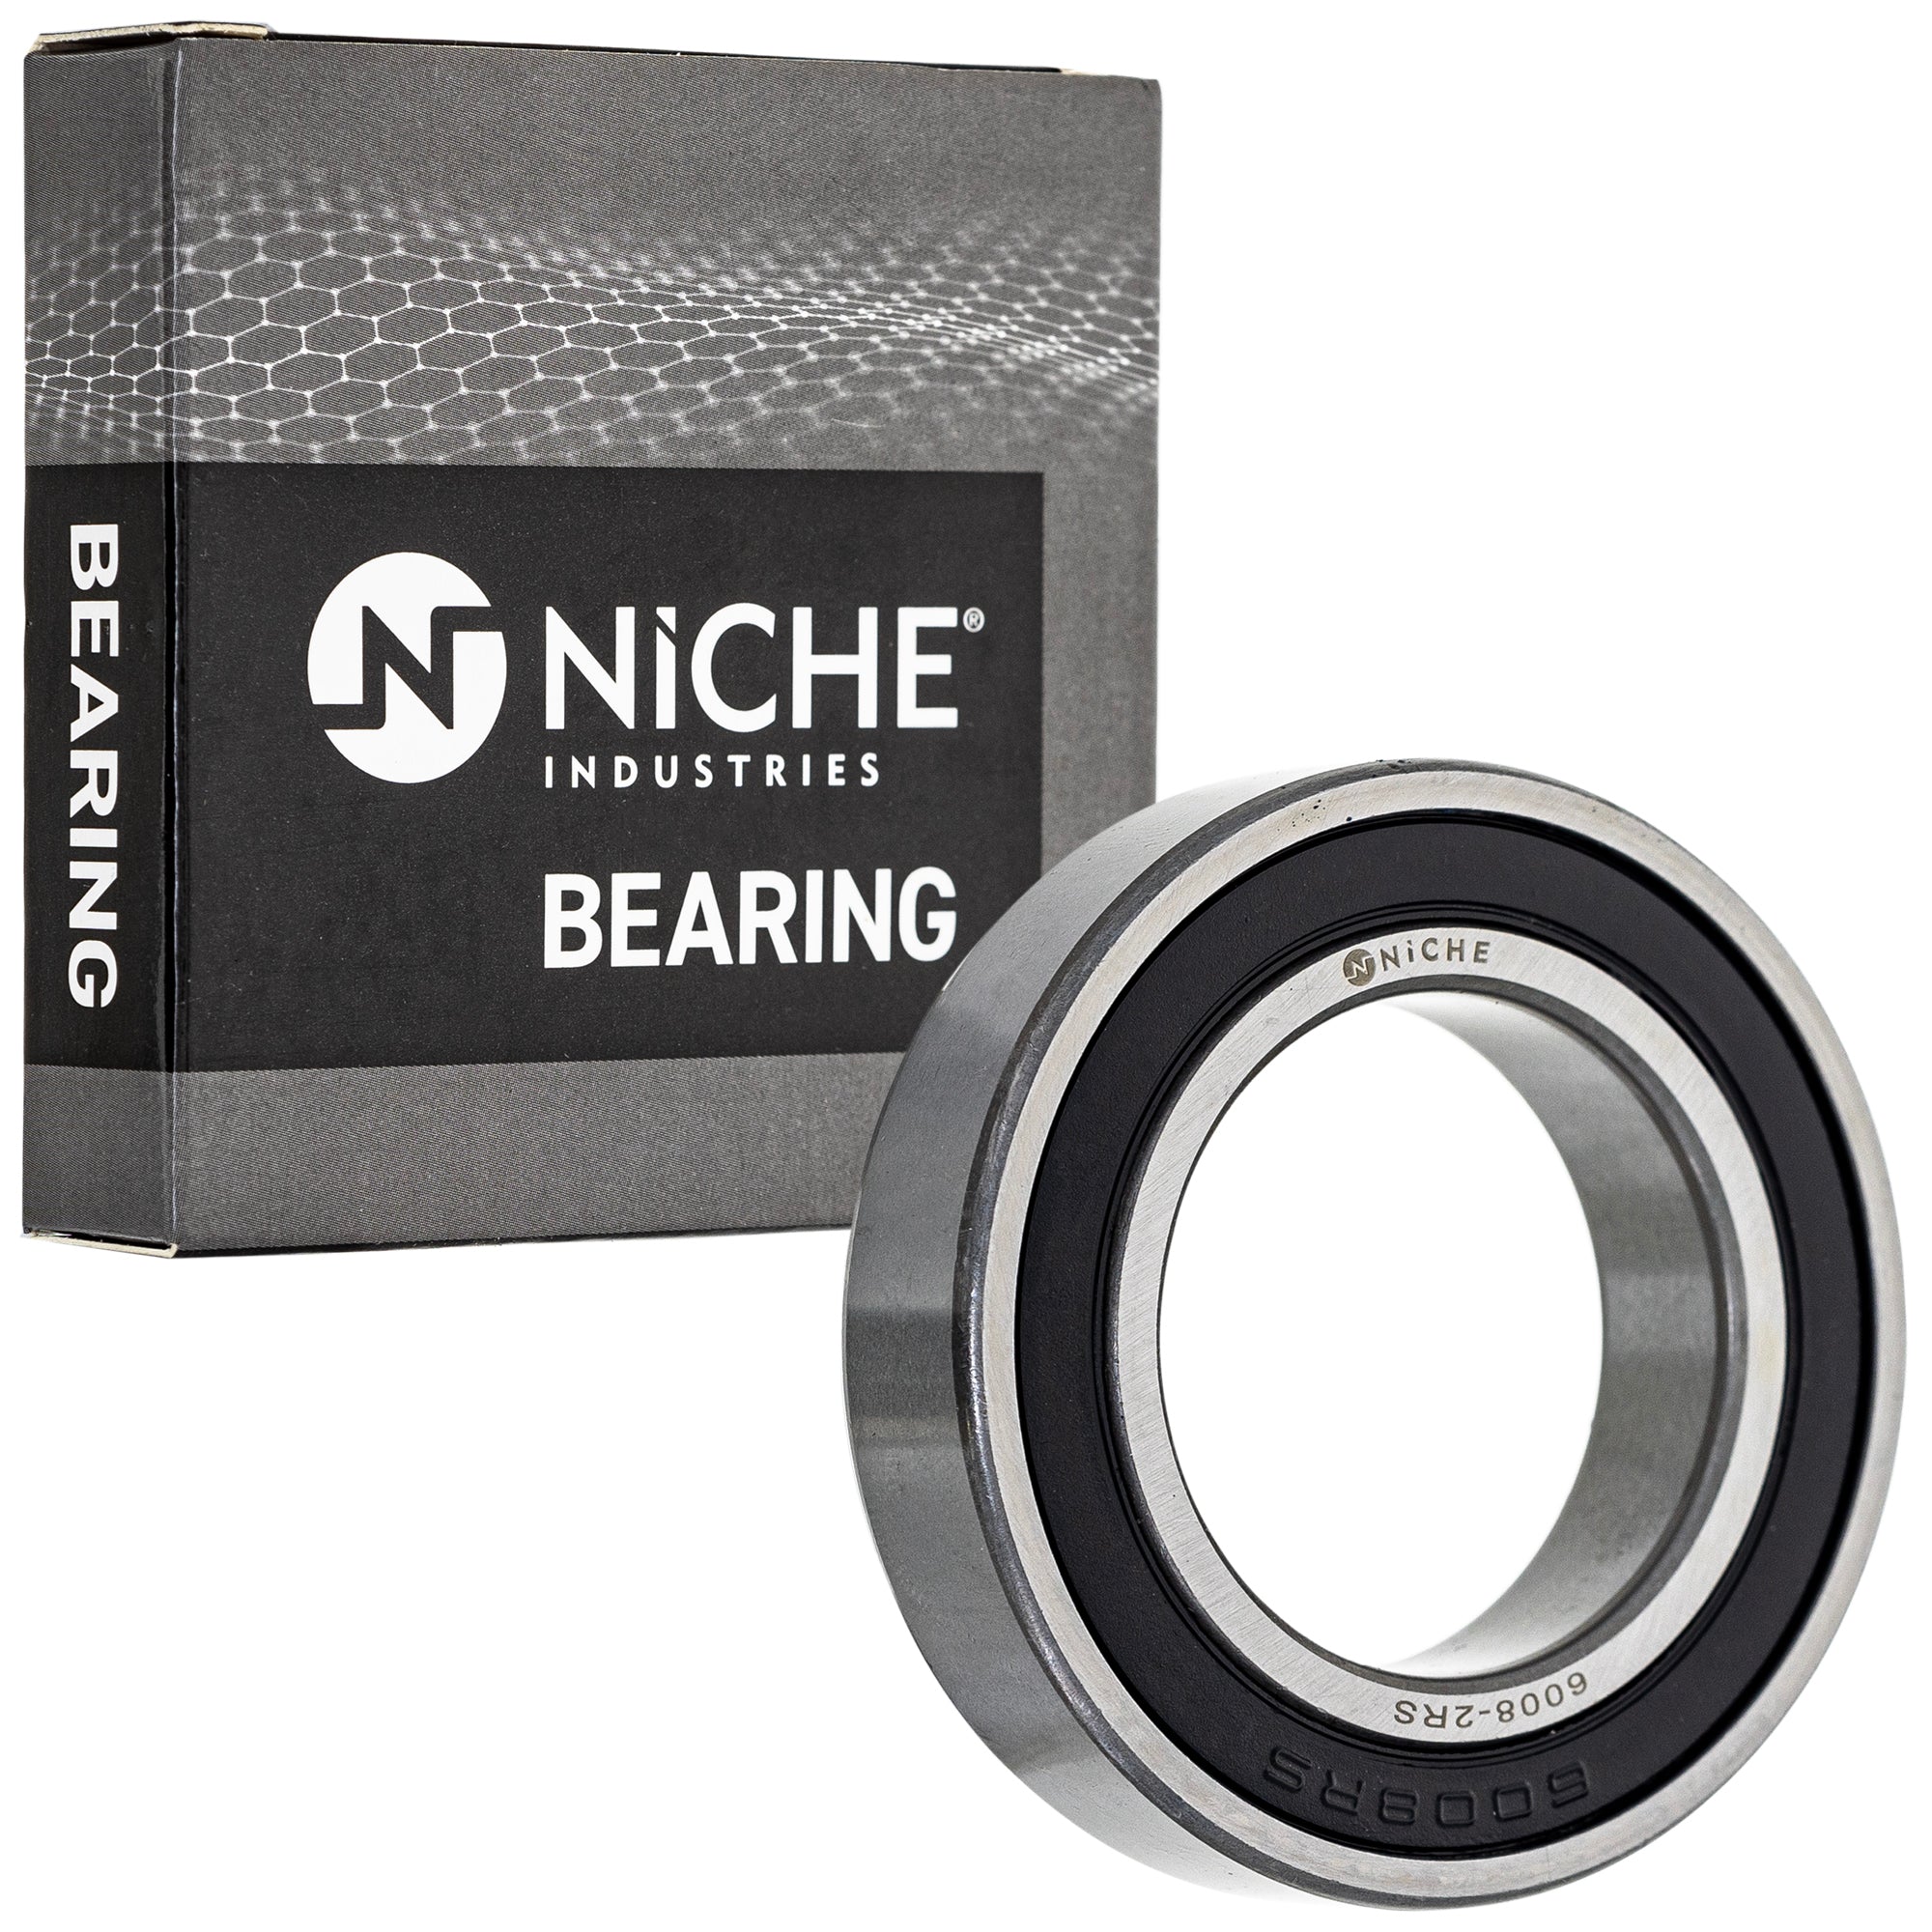 NICHE 519-CBB2253R Bearing 10-Pack for zOTHER Arctic Cat Textron